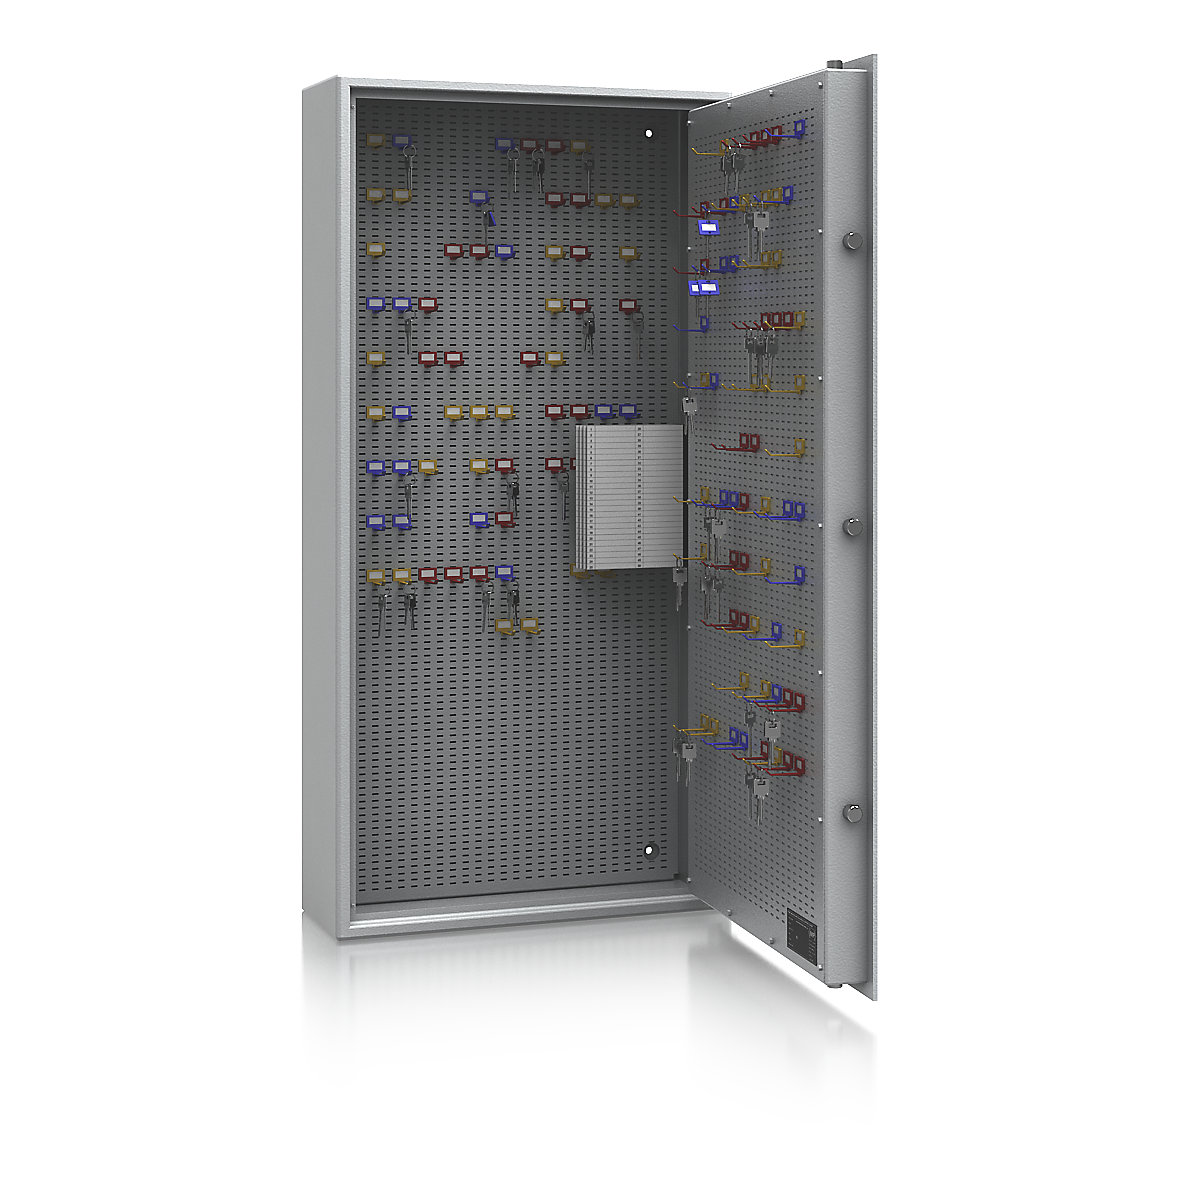 Key safe, security level A and Euro standard S1, light grey, HxWxD 1200 x 600 x 200 mm, for up to 350 hooks-5